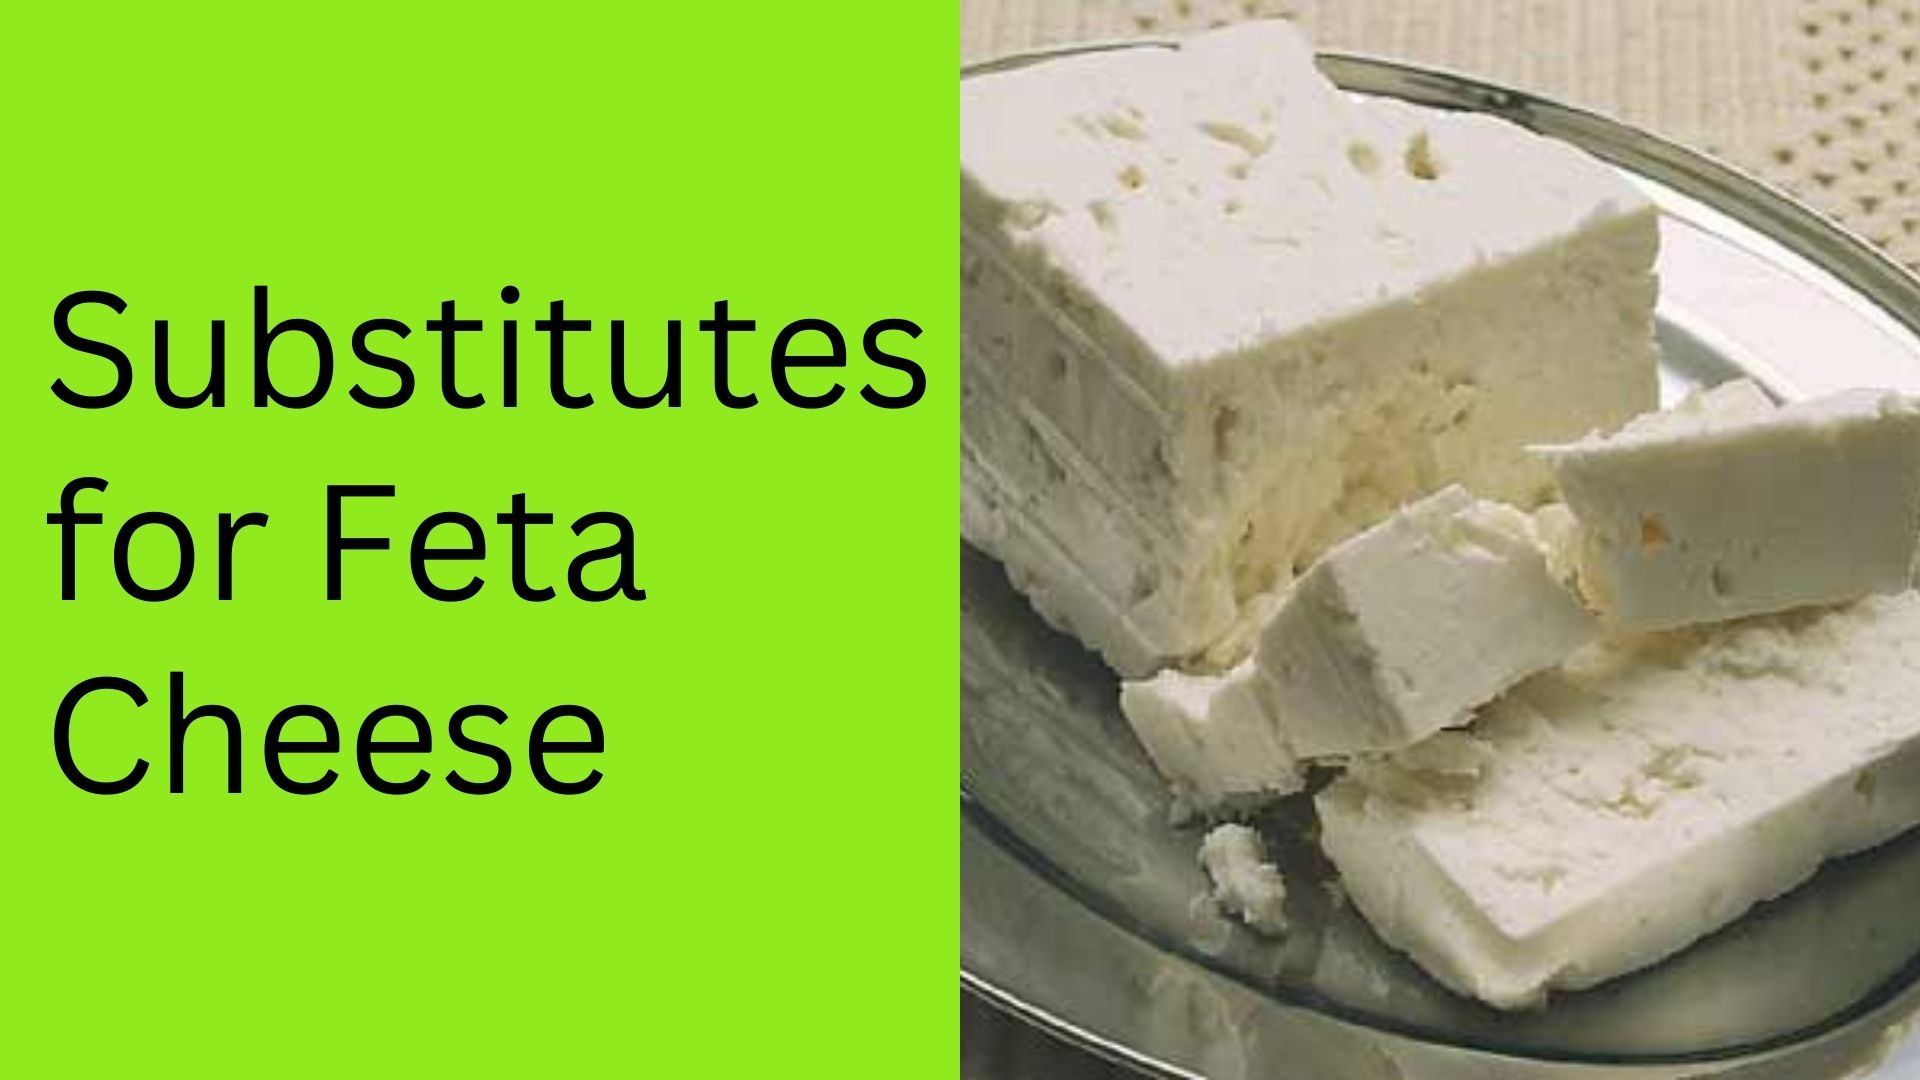 Substitutes for Feta Cheese